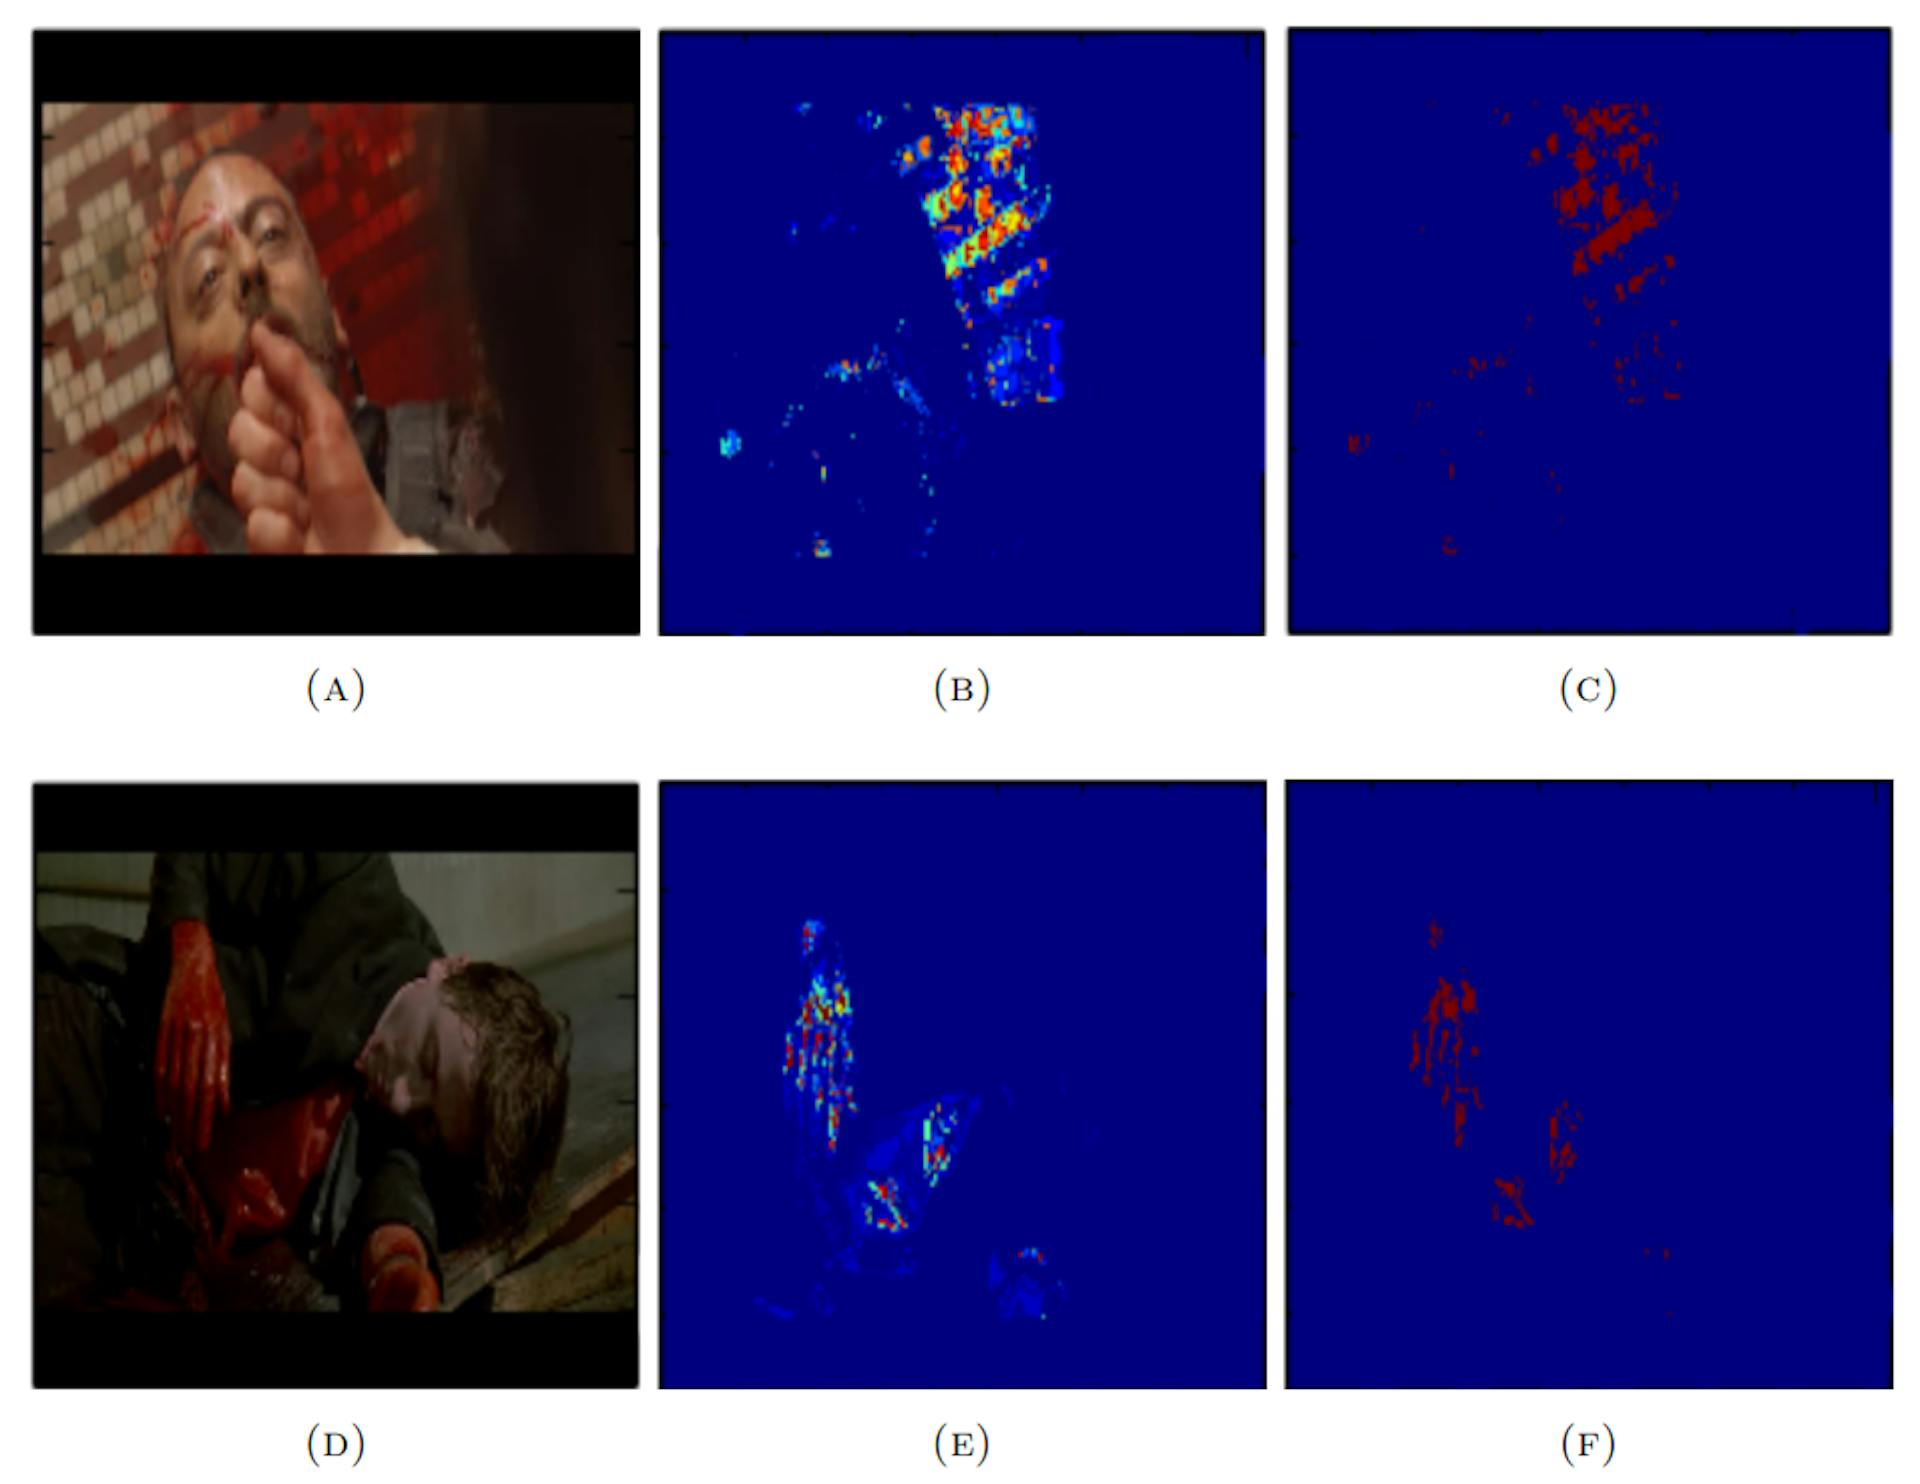 Figure 4.6: Figure showing the performance of the blood detector on sample frames from the Hollywood dataset. The images in the first column (A and D) are the input images, the second column images (B and E) are the blood probability maps and the images in the last column (C and F) are the binarized blood probability maps.